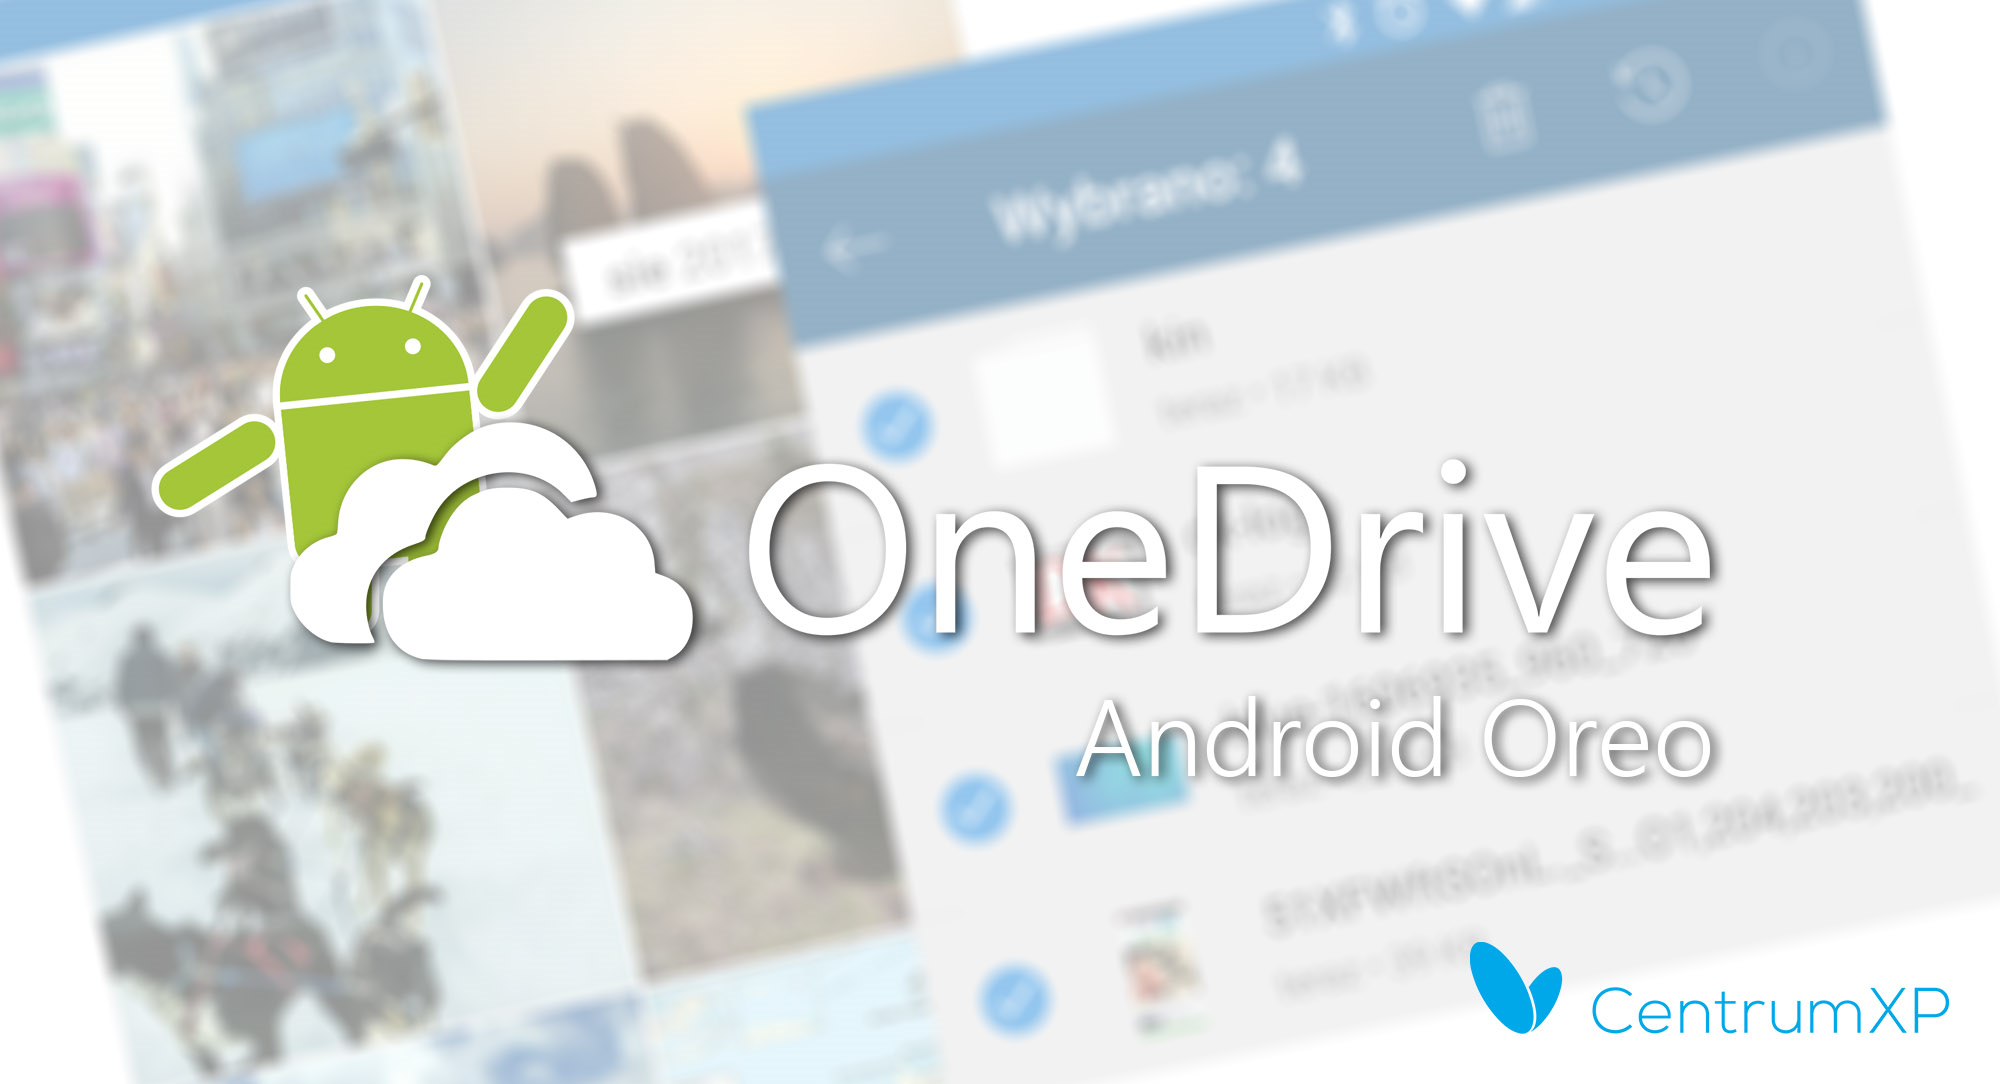 One Drive Android Oreo